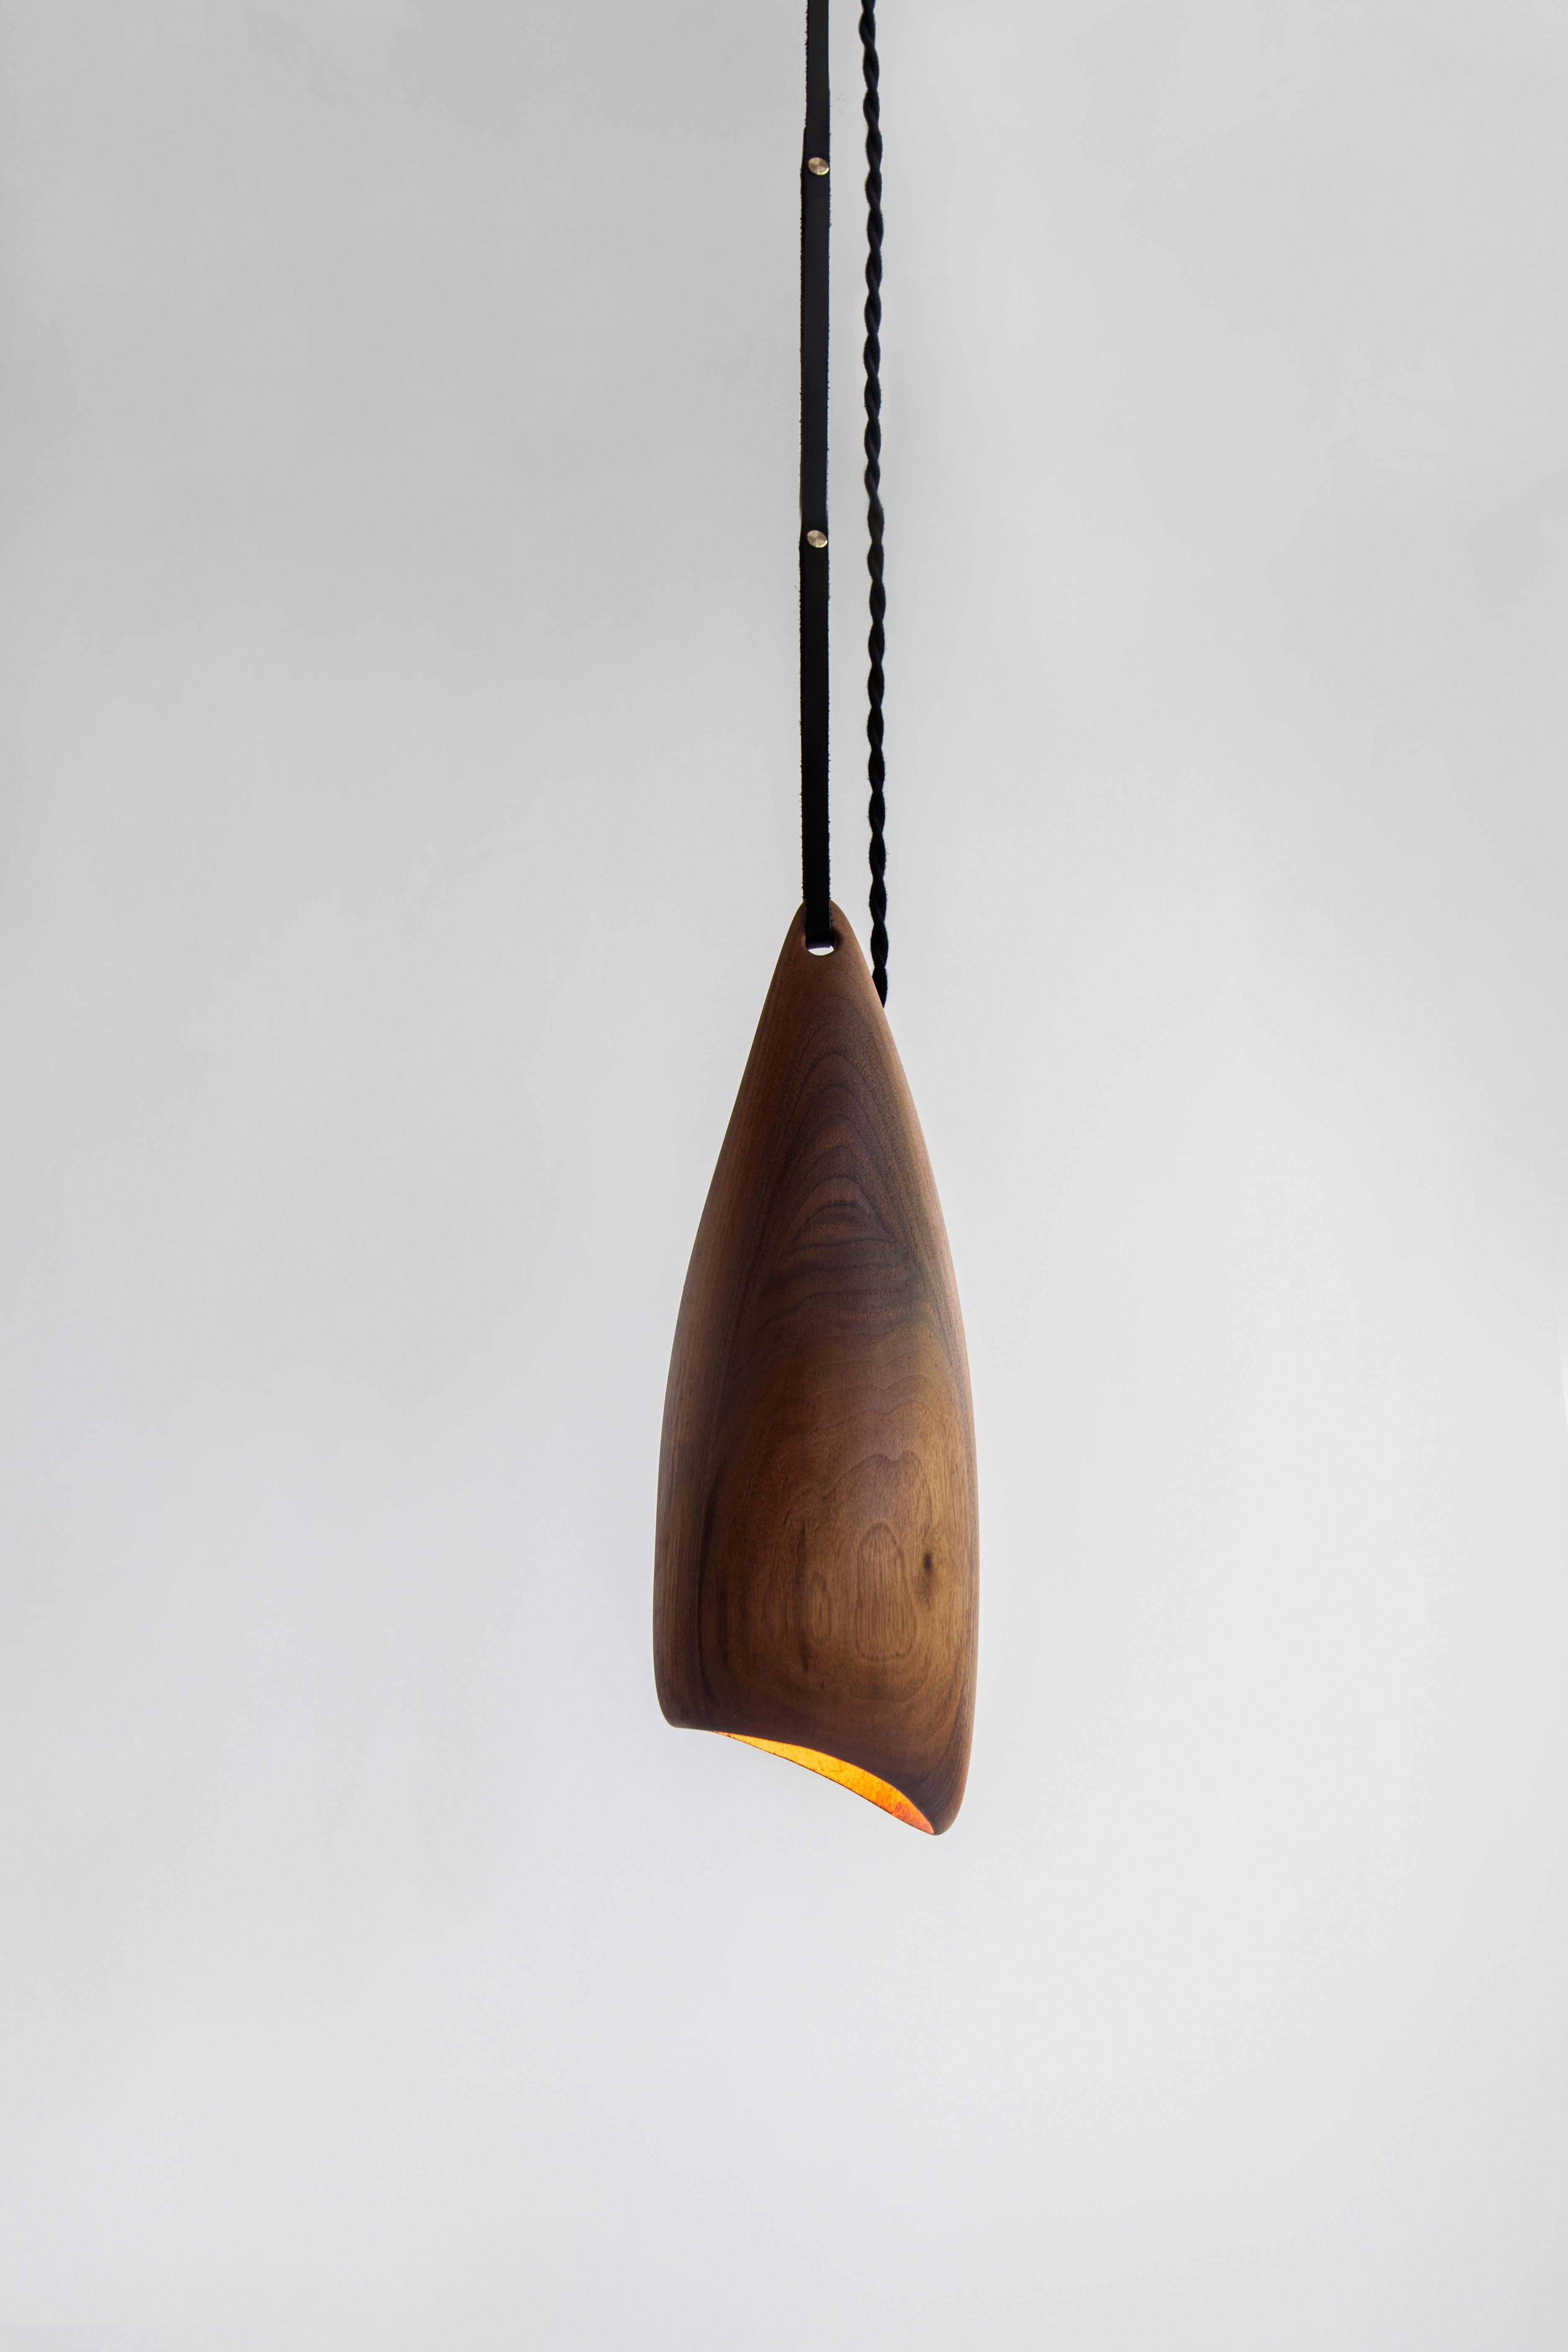 Rosa Contemporary carved Walnut hanging lamps by Nadine Hajjar For Sale 5